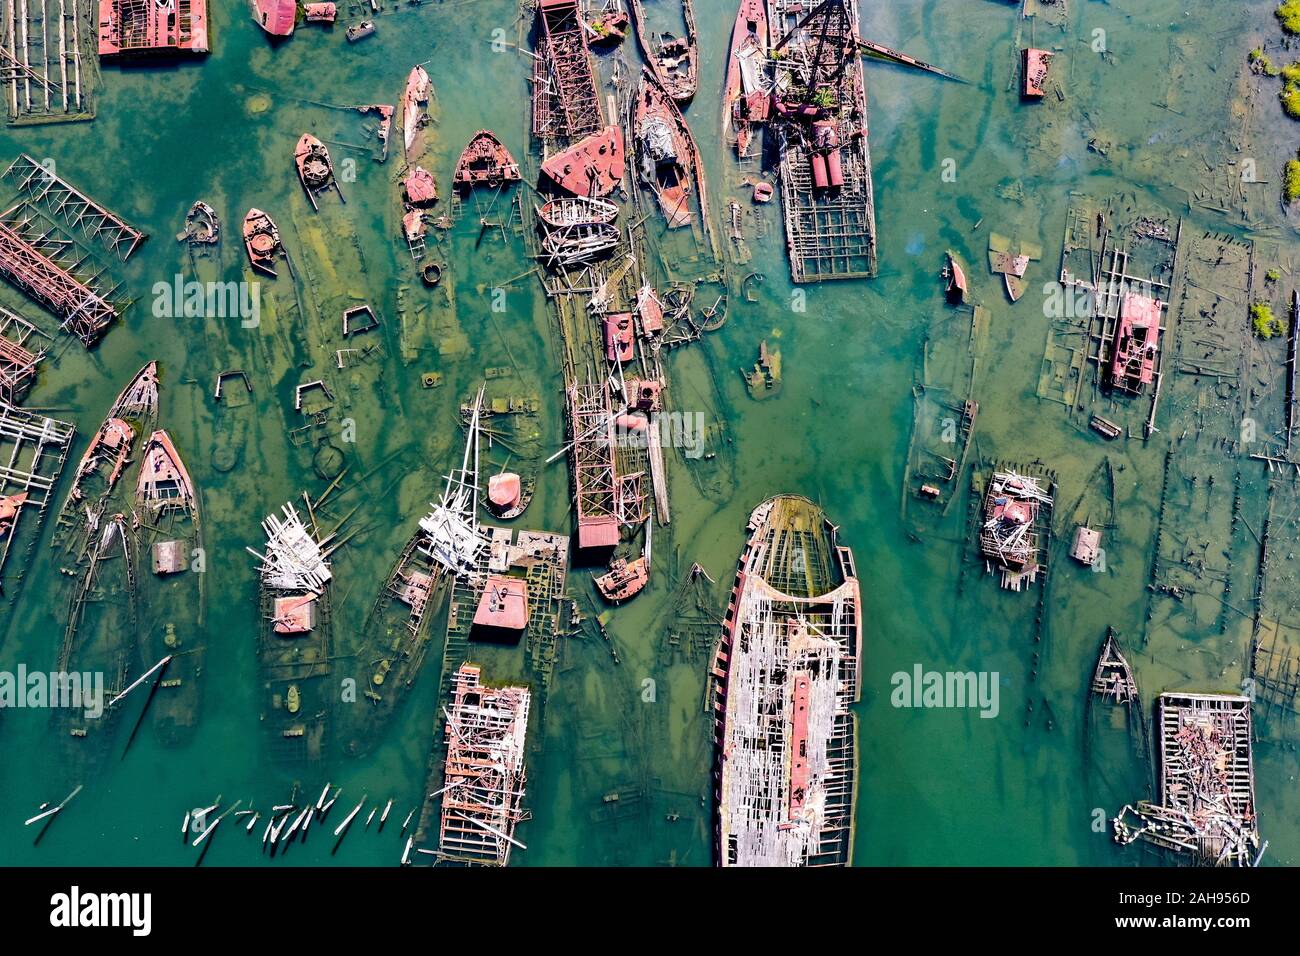 An aerial view from above of abandoned ships at Arthur Kill Boat Graveyard in Staten Island, New York. Stock Photo